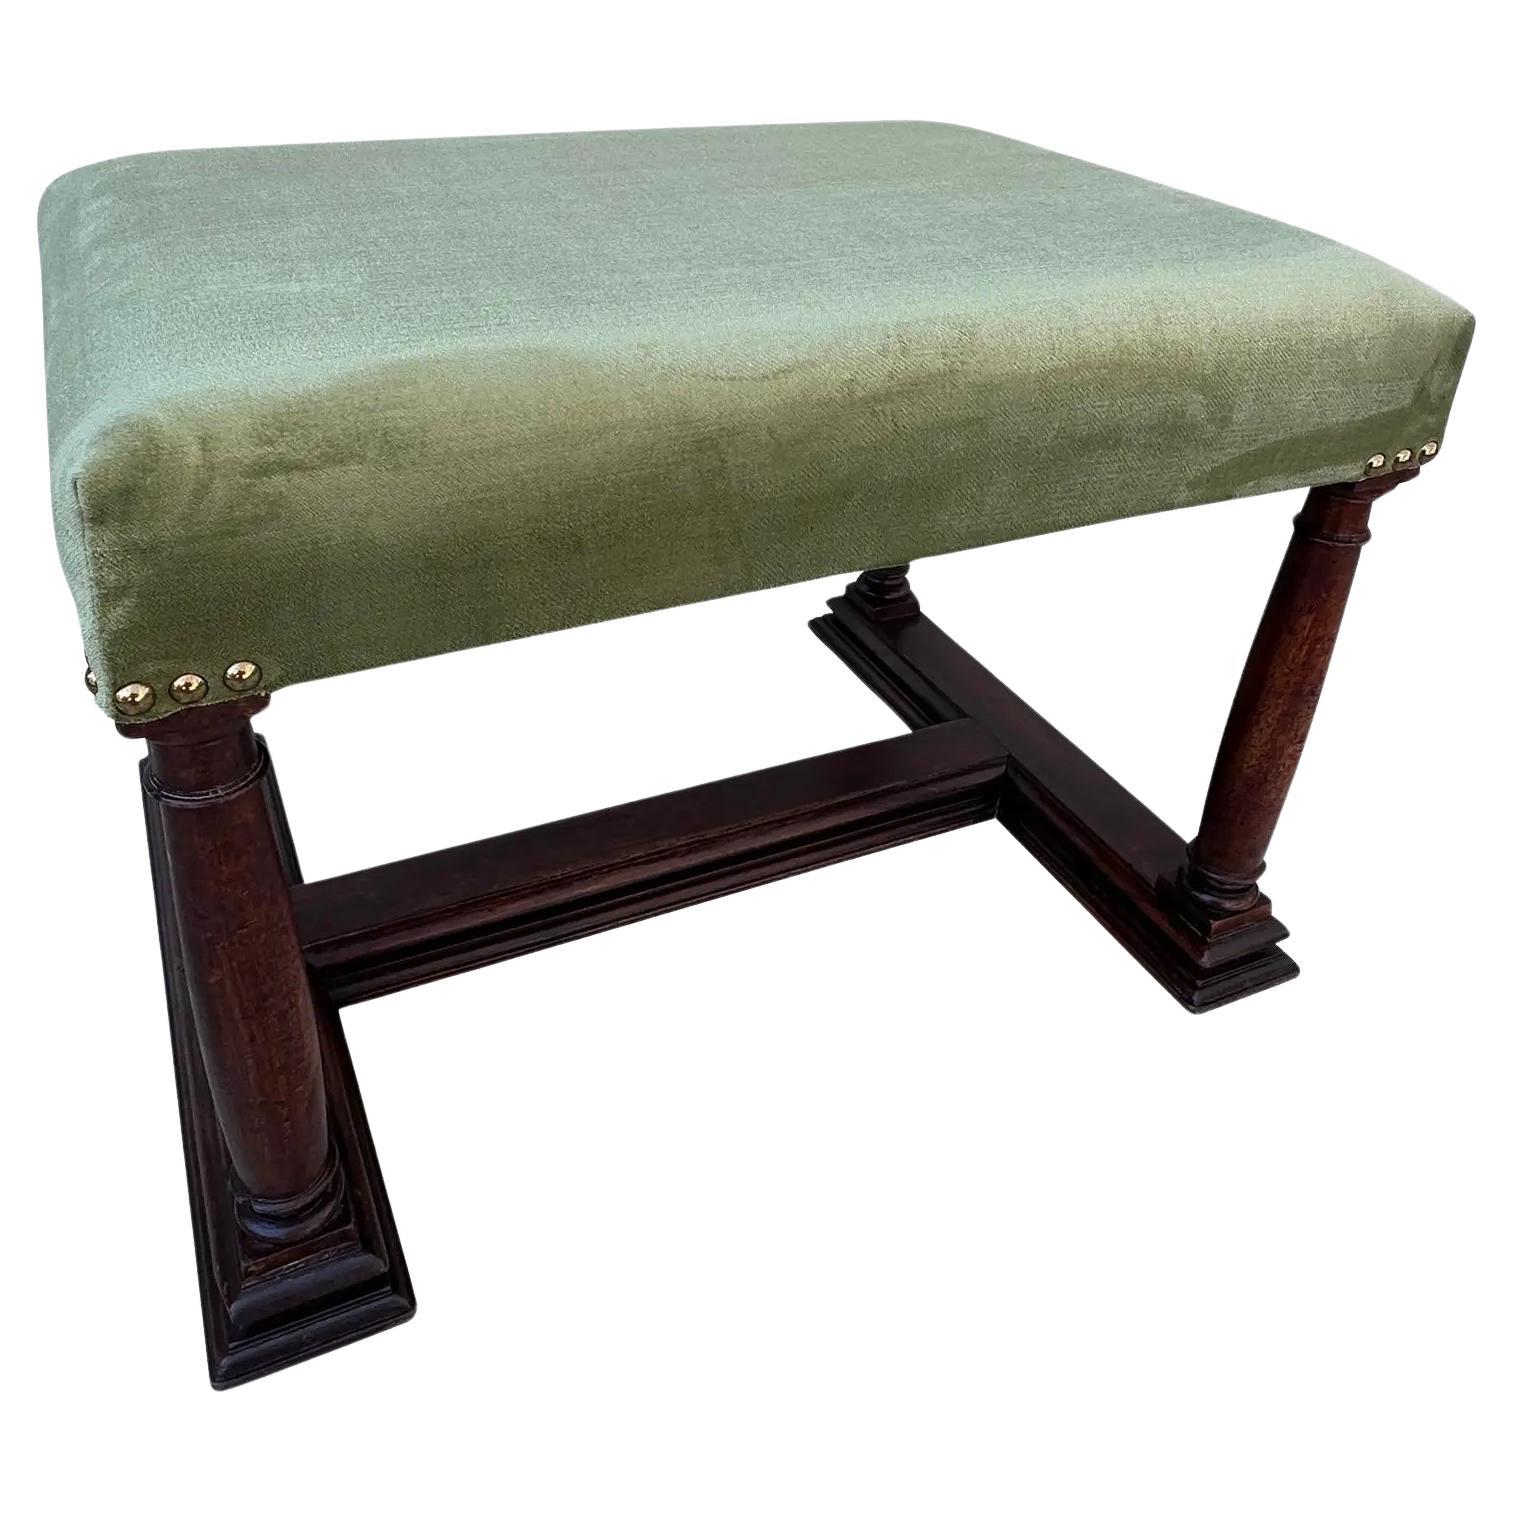 Newly Upholstered English Benches